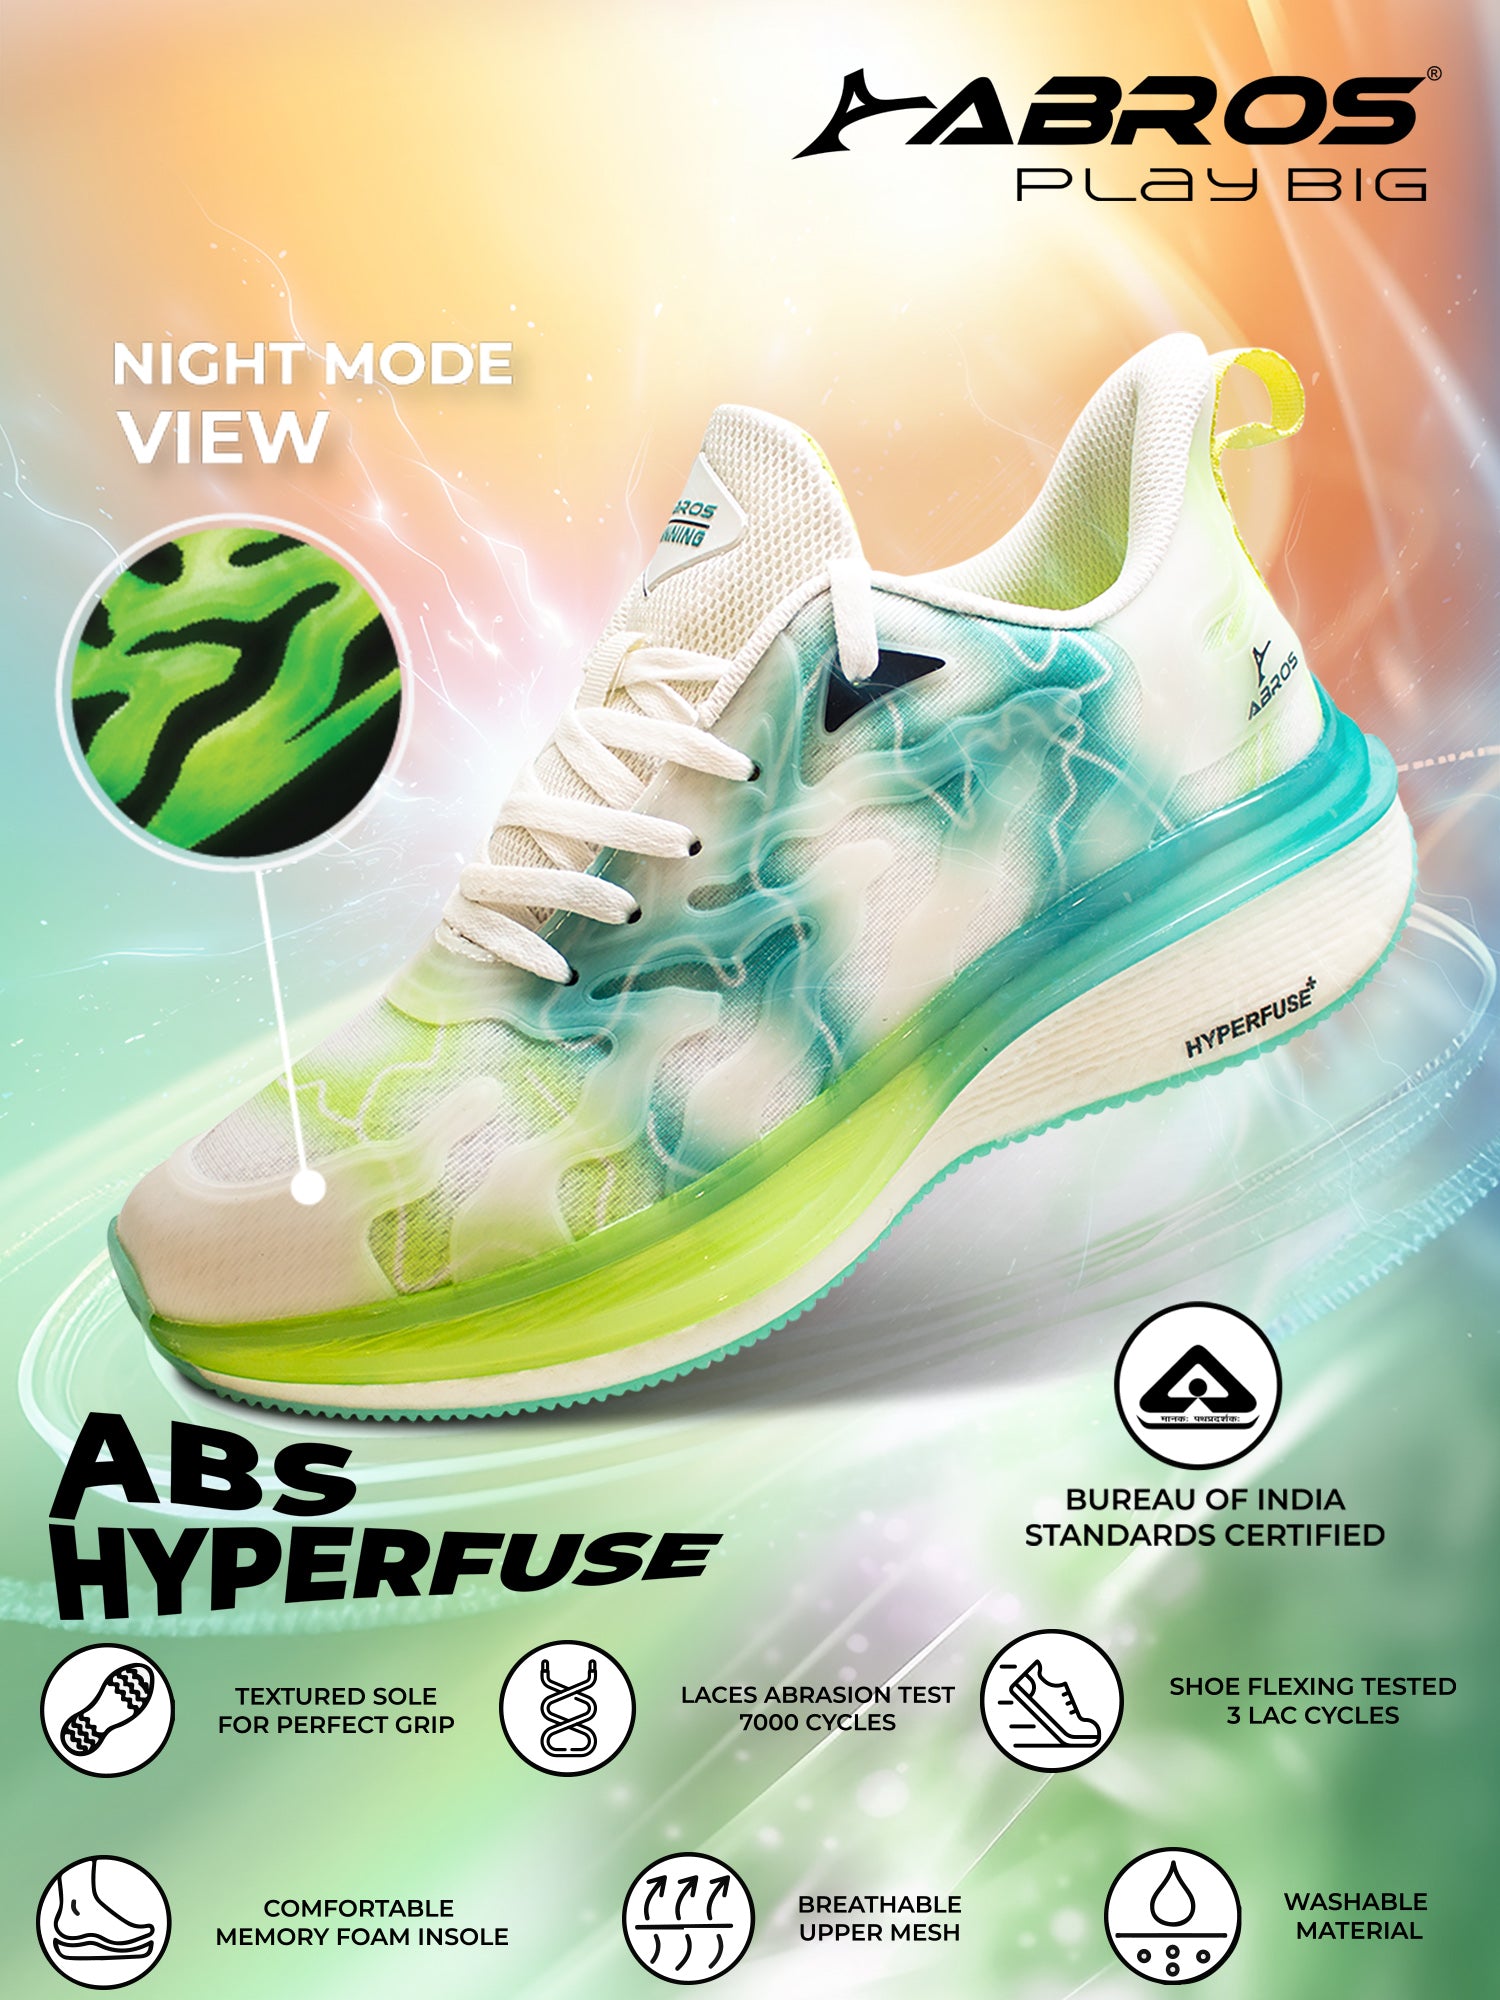 ABROS Epic Sports Shoes For Men